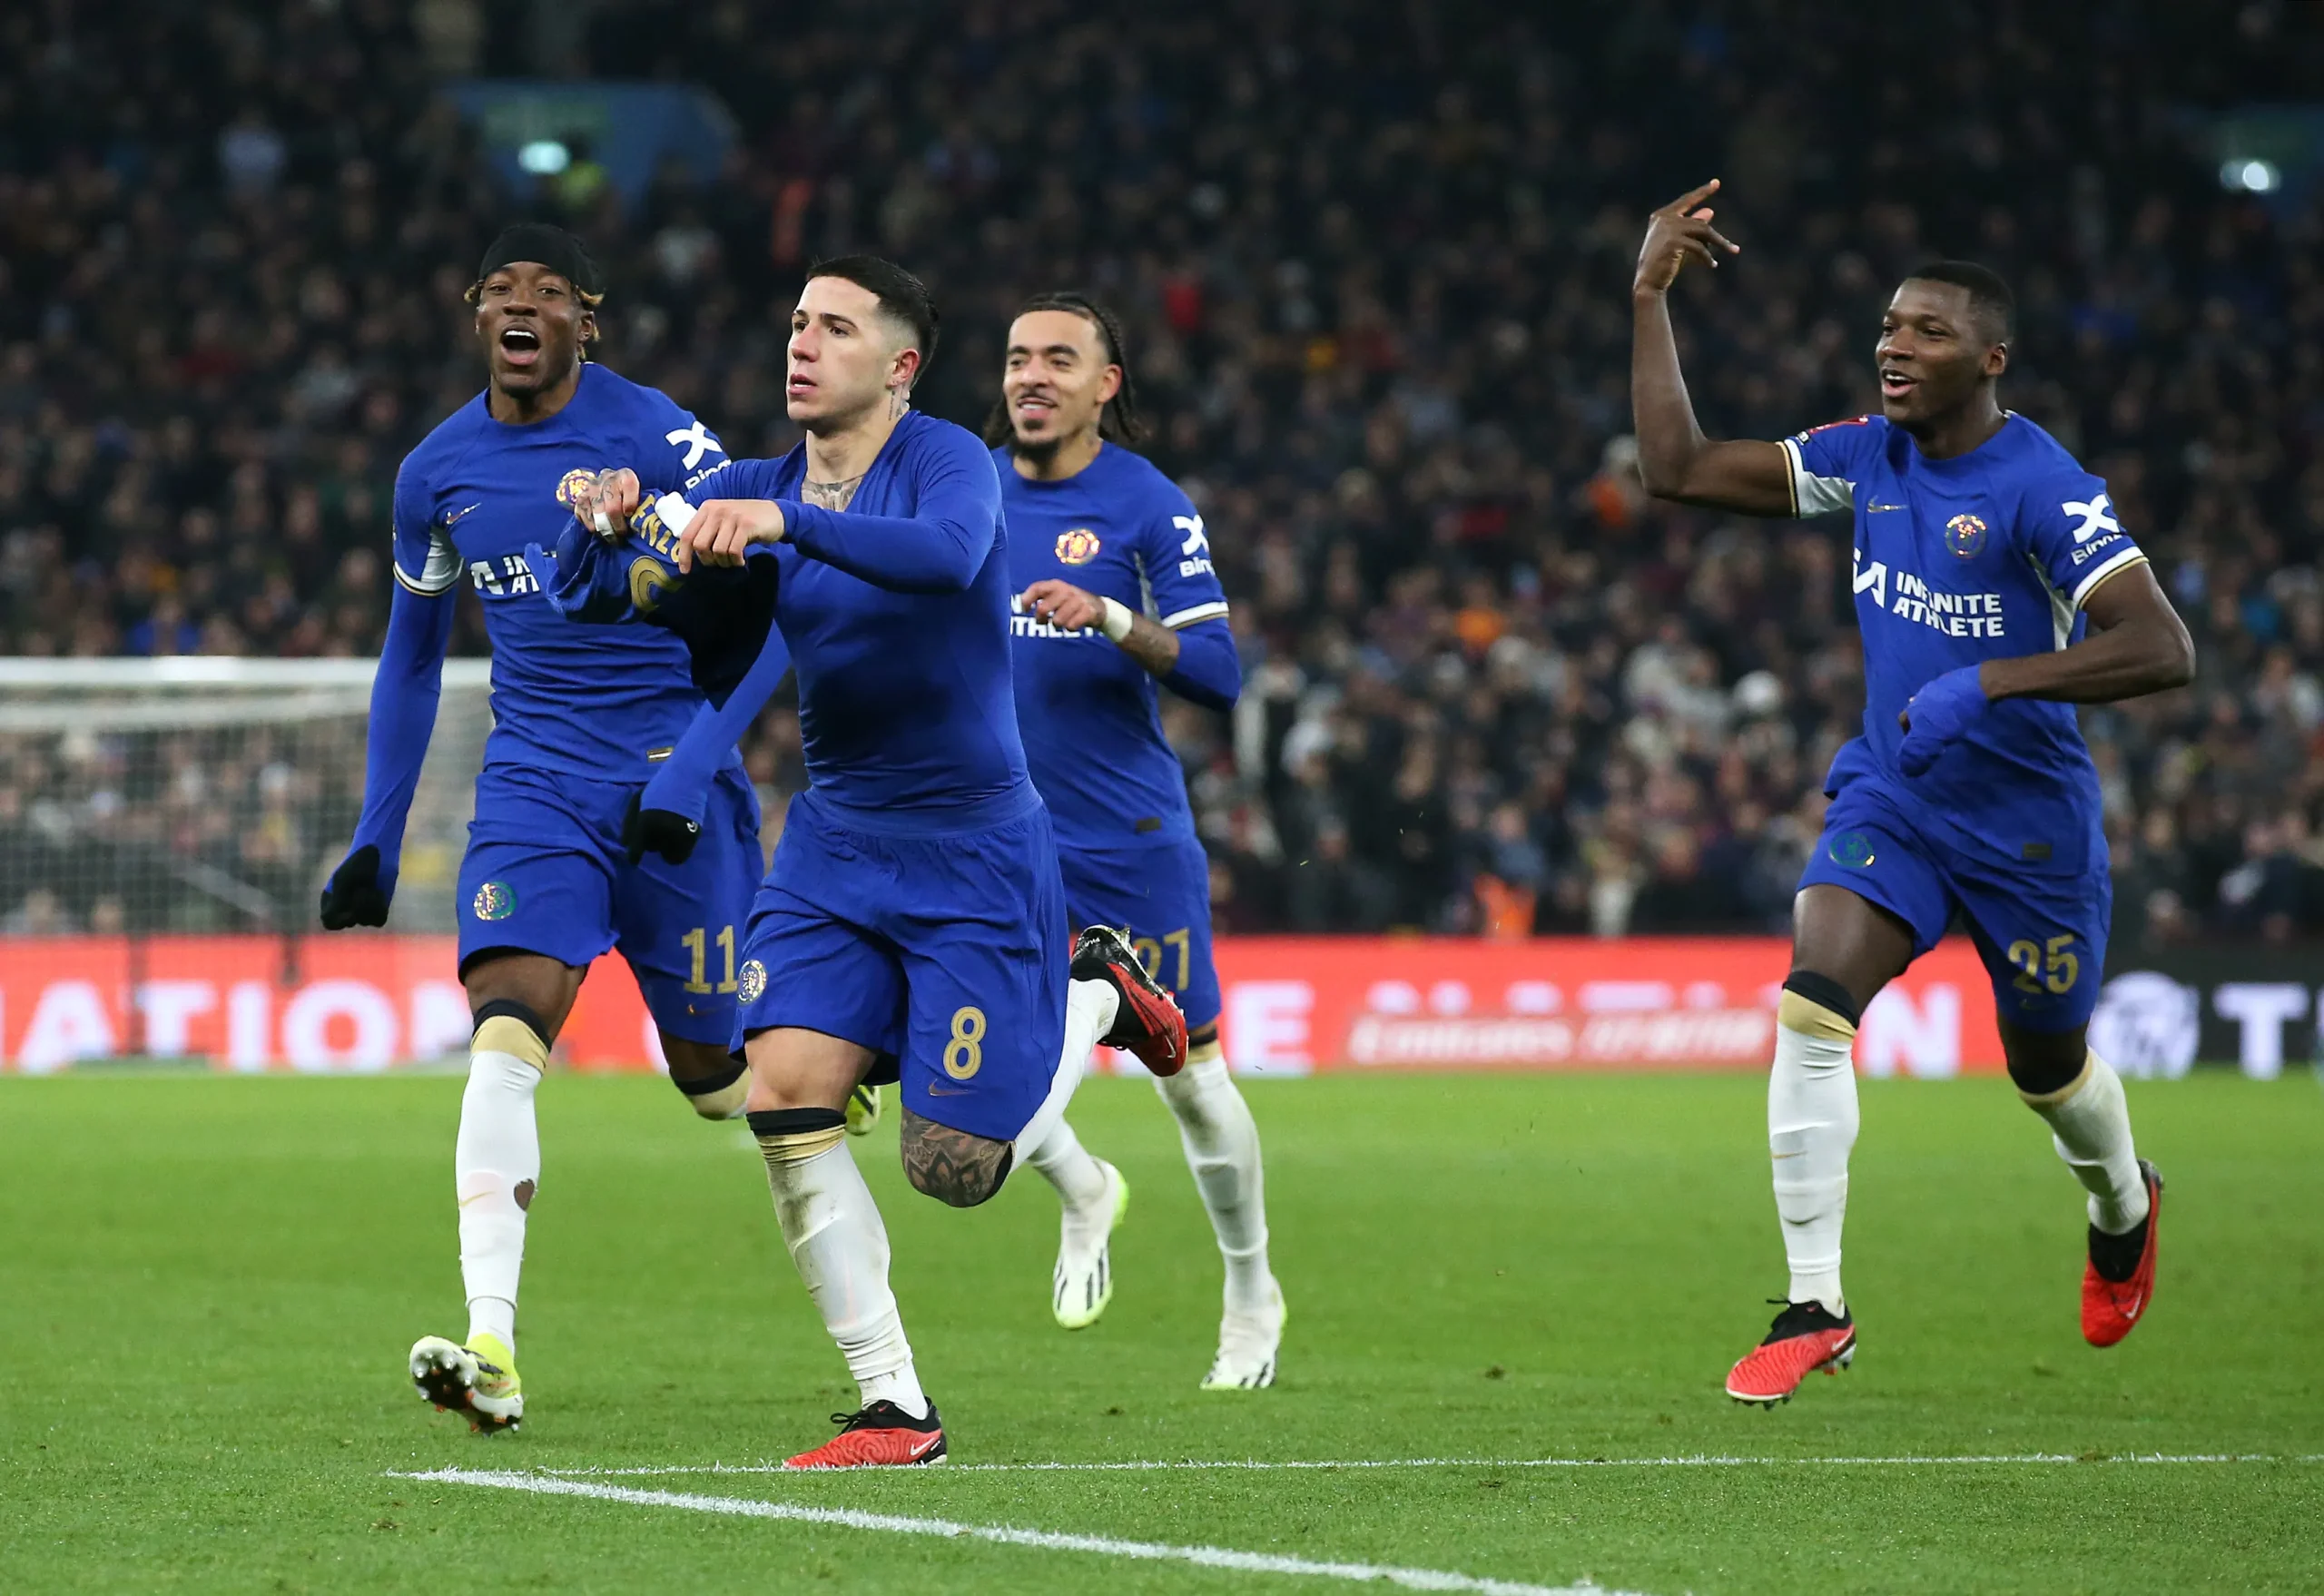 CHELSEA BEAT ASTON VILLA 3-1 IN FA CUP FOURTH ROUND REPLAY AWAY